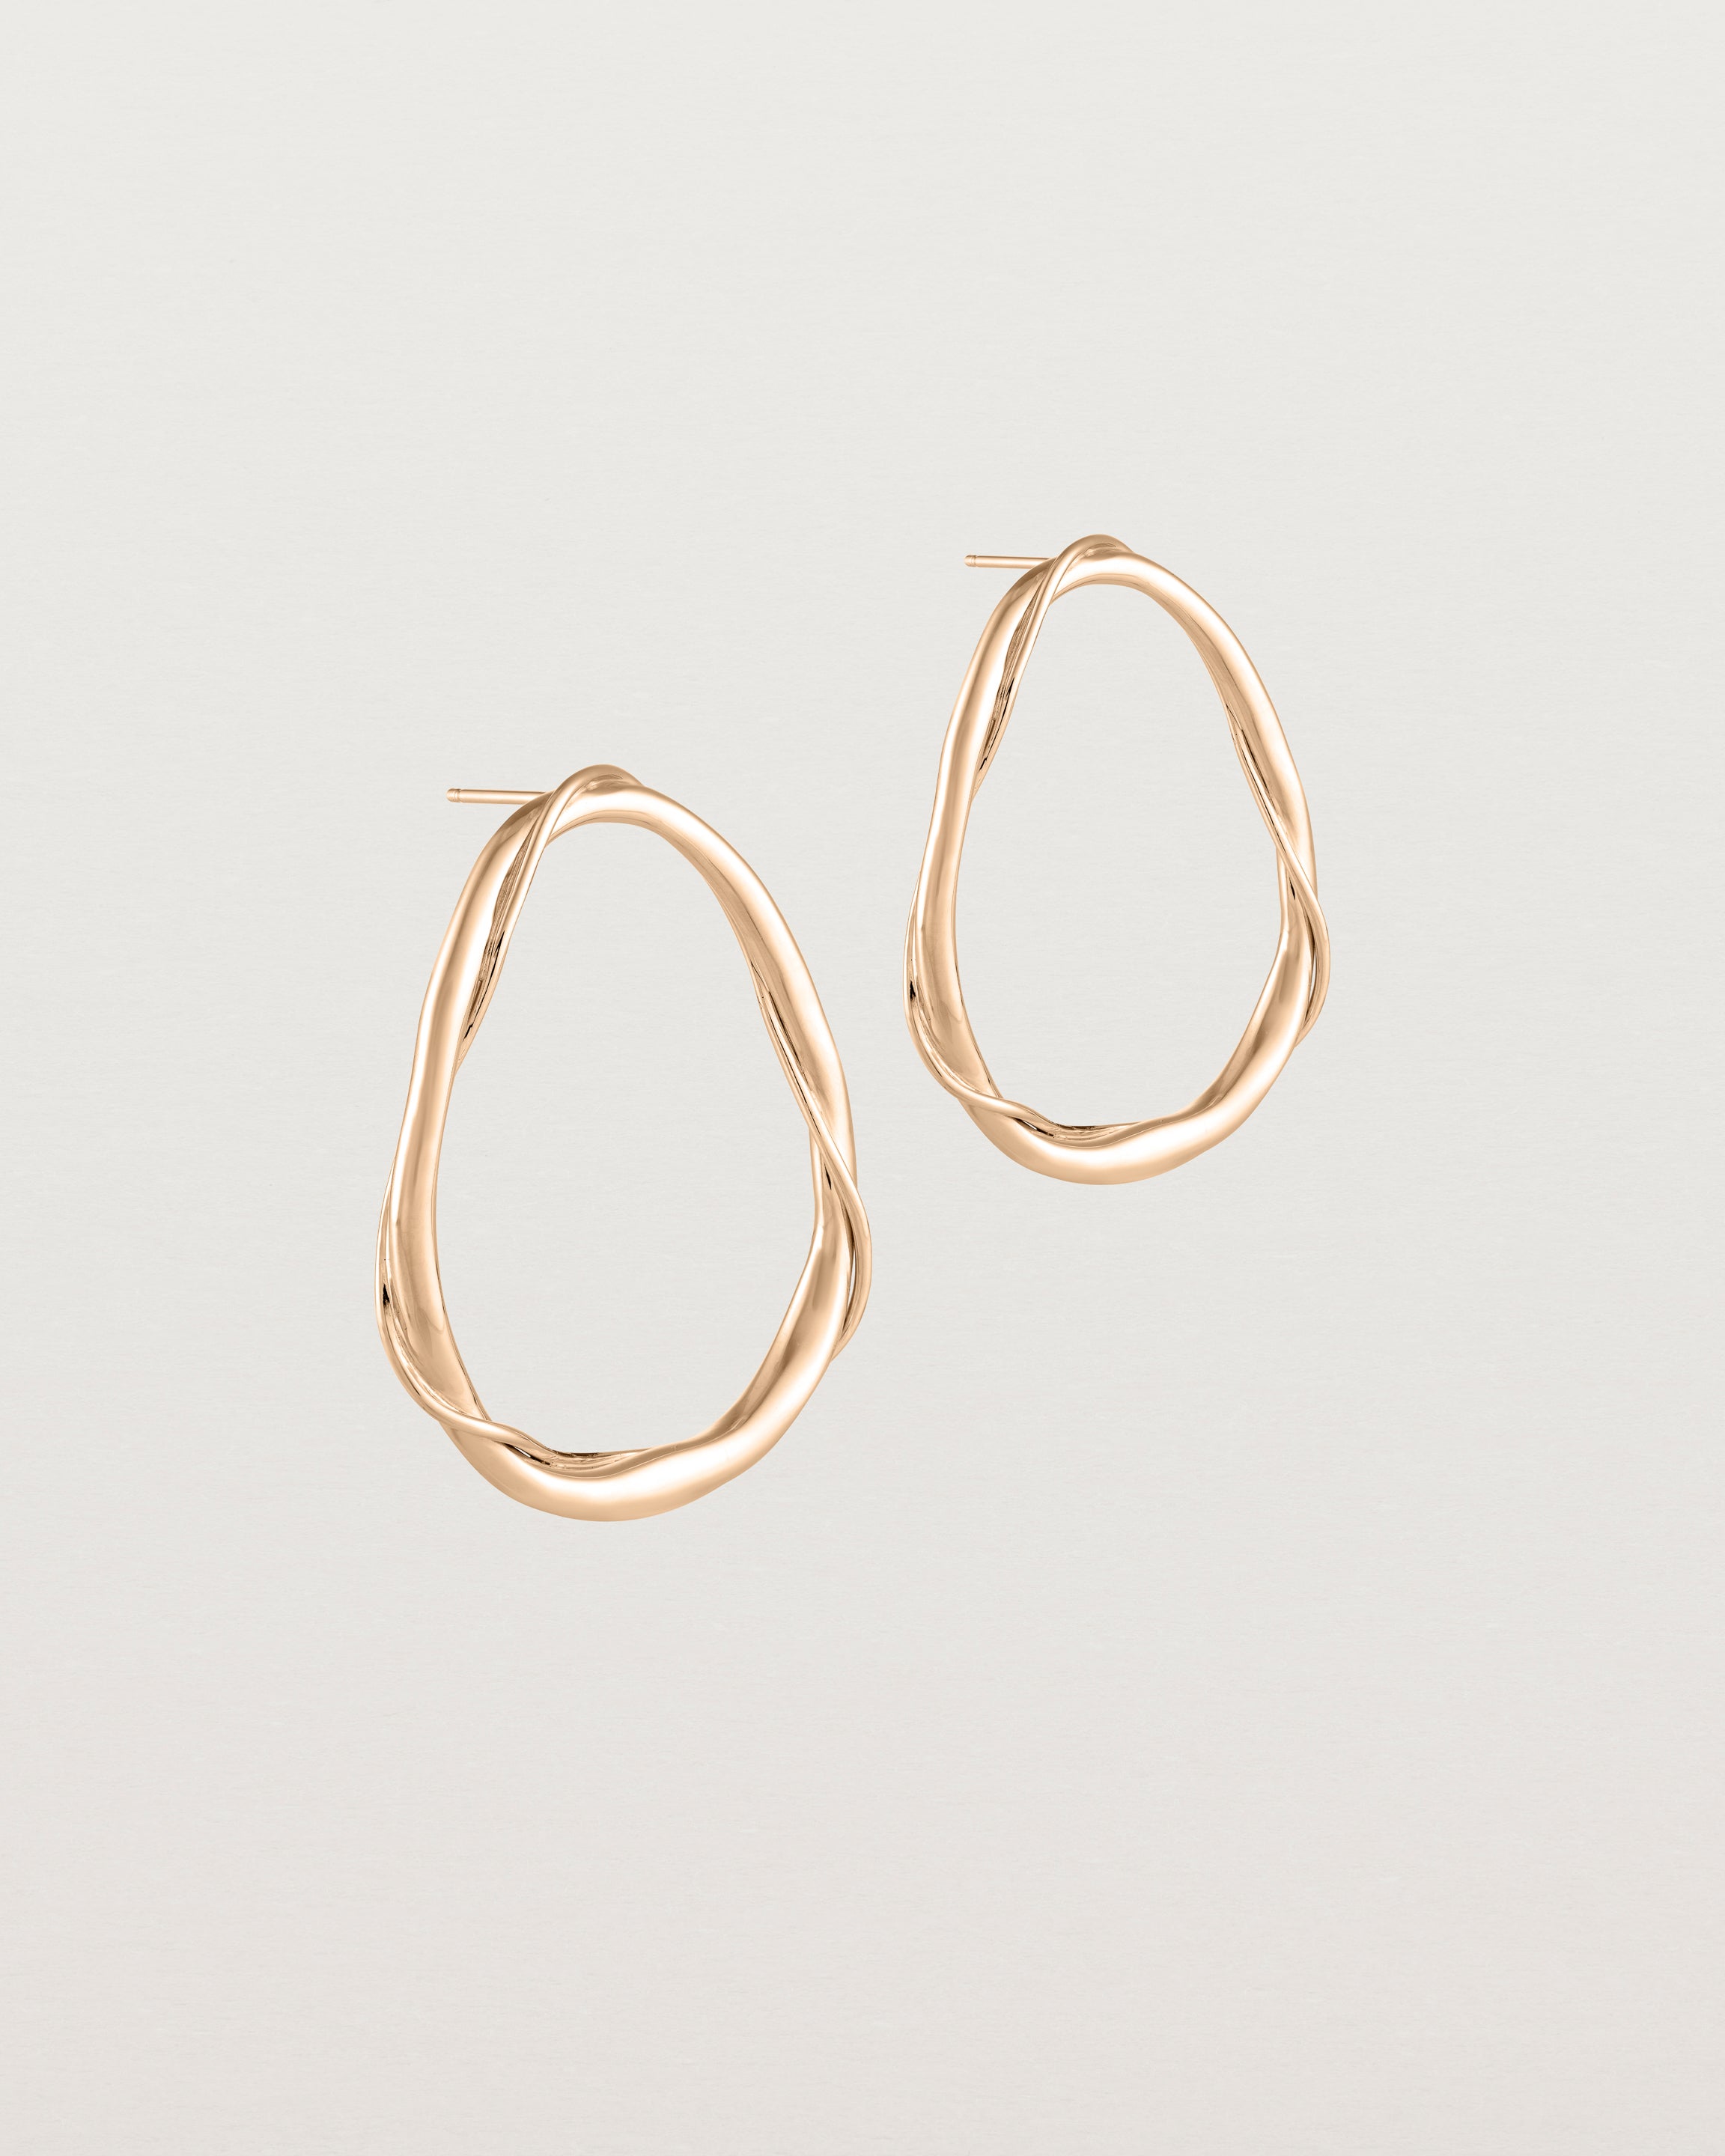 Angled view of the Dalí Earrings in rose gold.